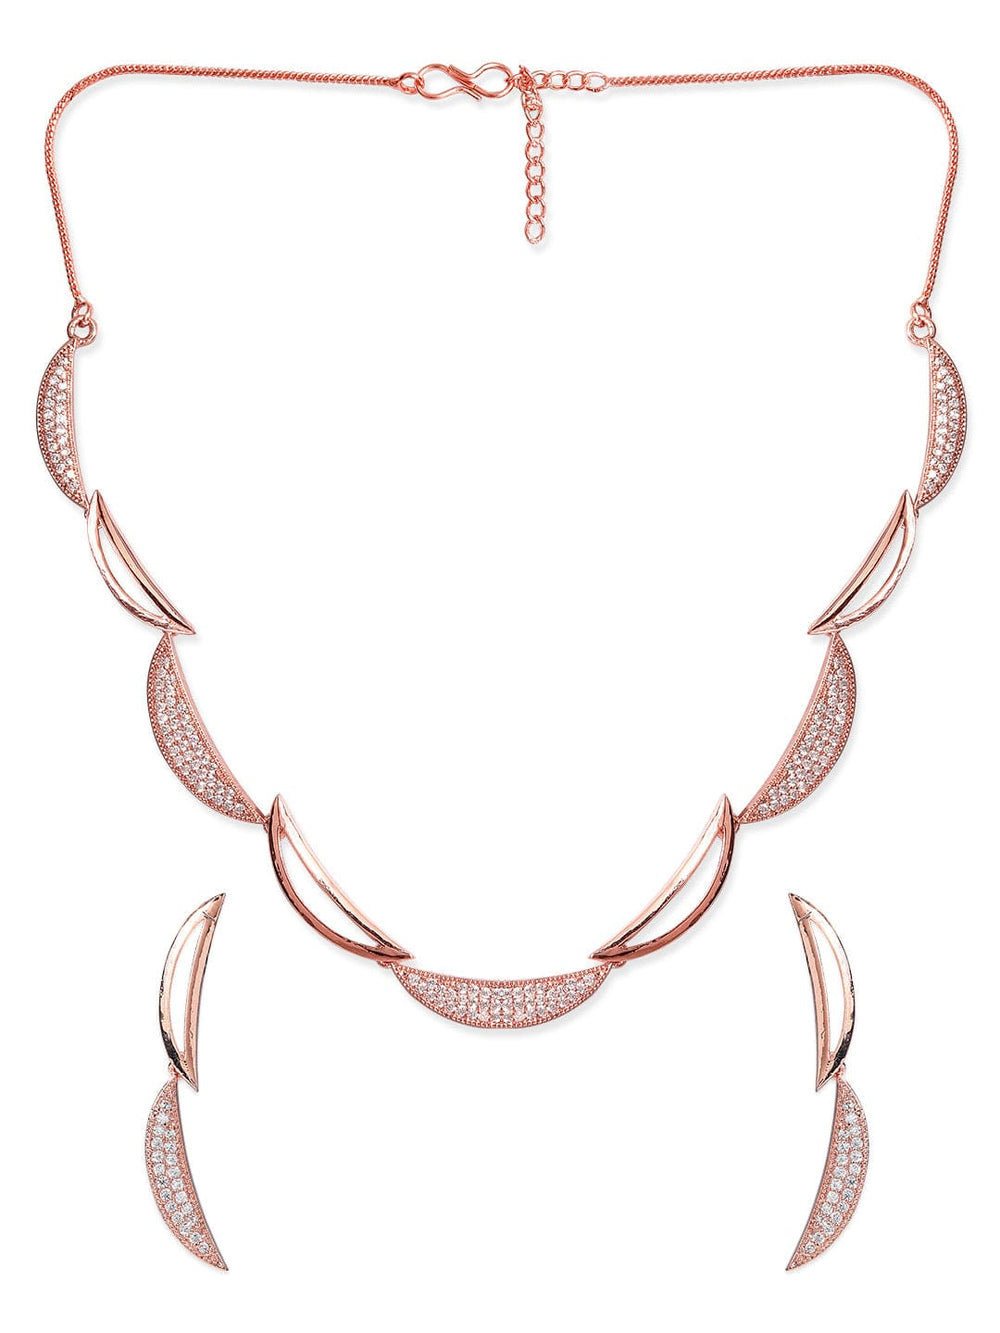 Rubans Rose Gold Plated Zirconia Stone Studded Handcrafted Necklace Set. Necklace Set